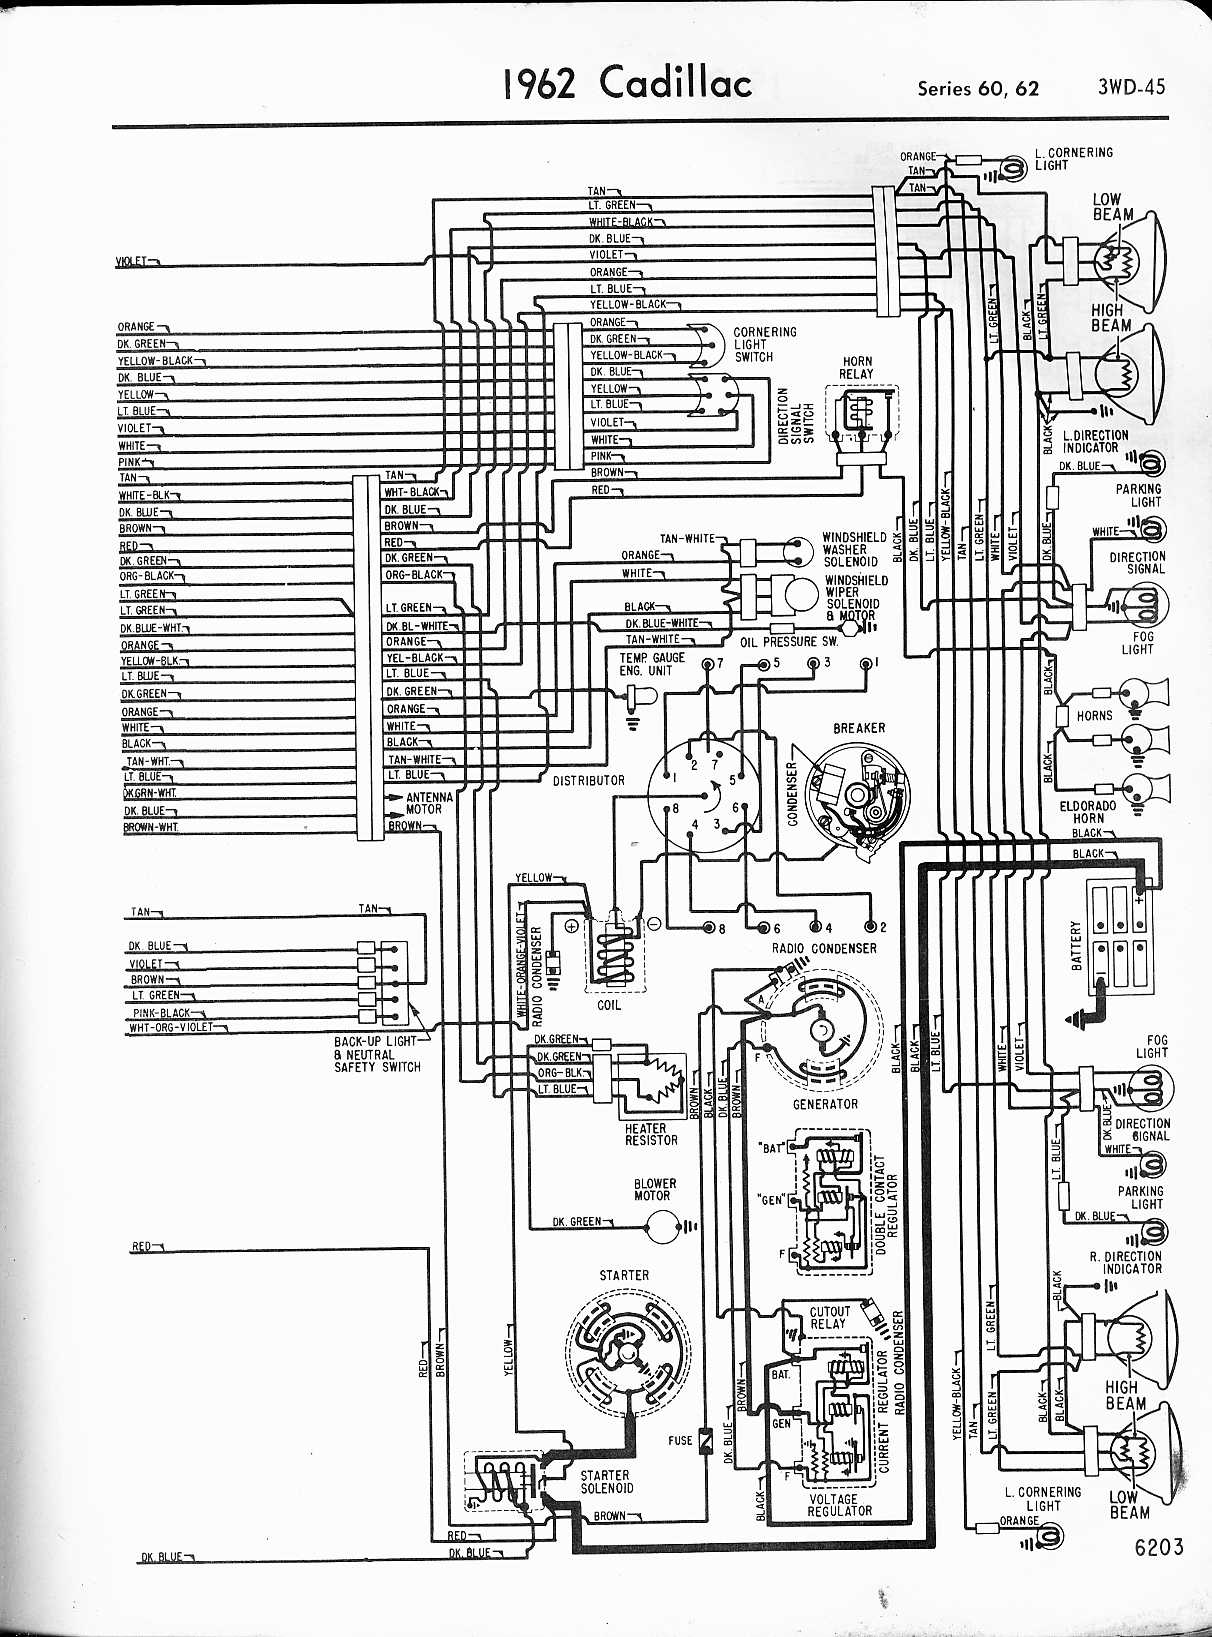 1968 Cadillac Ignition Switch Wiring Diagram from www.oldcarmanualproject.com